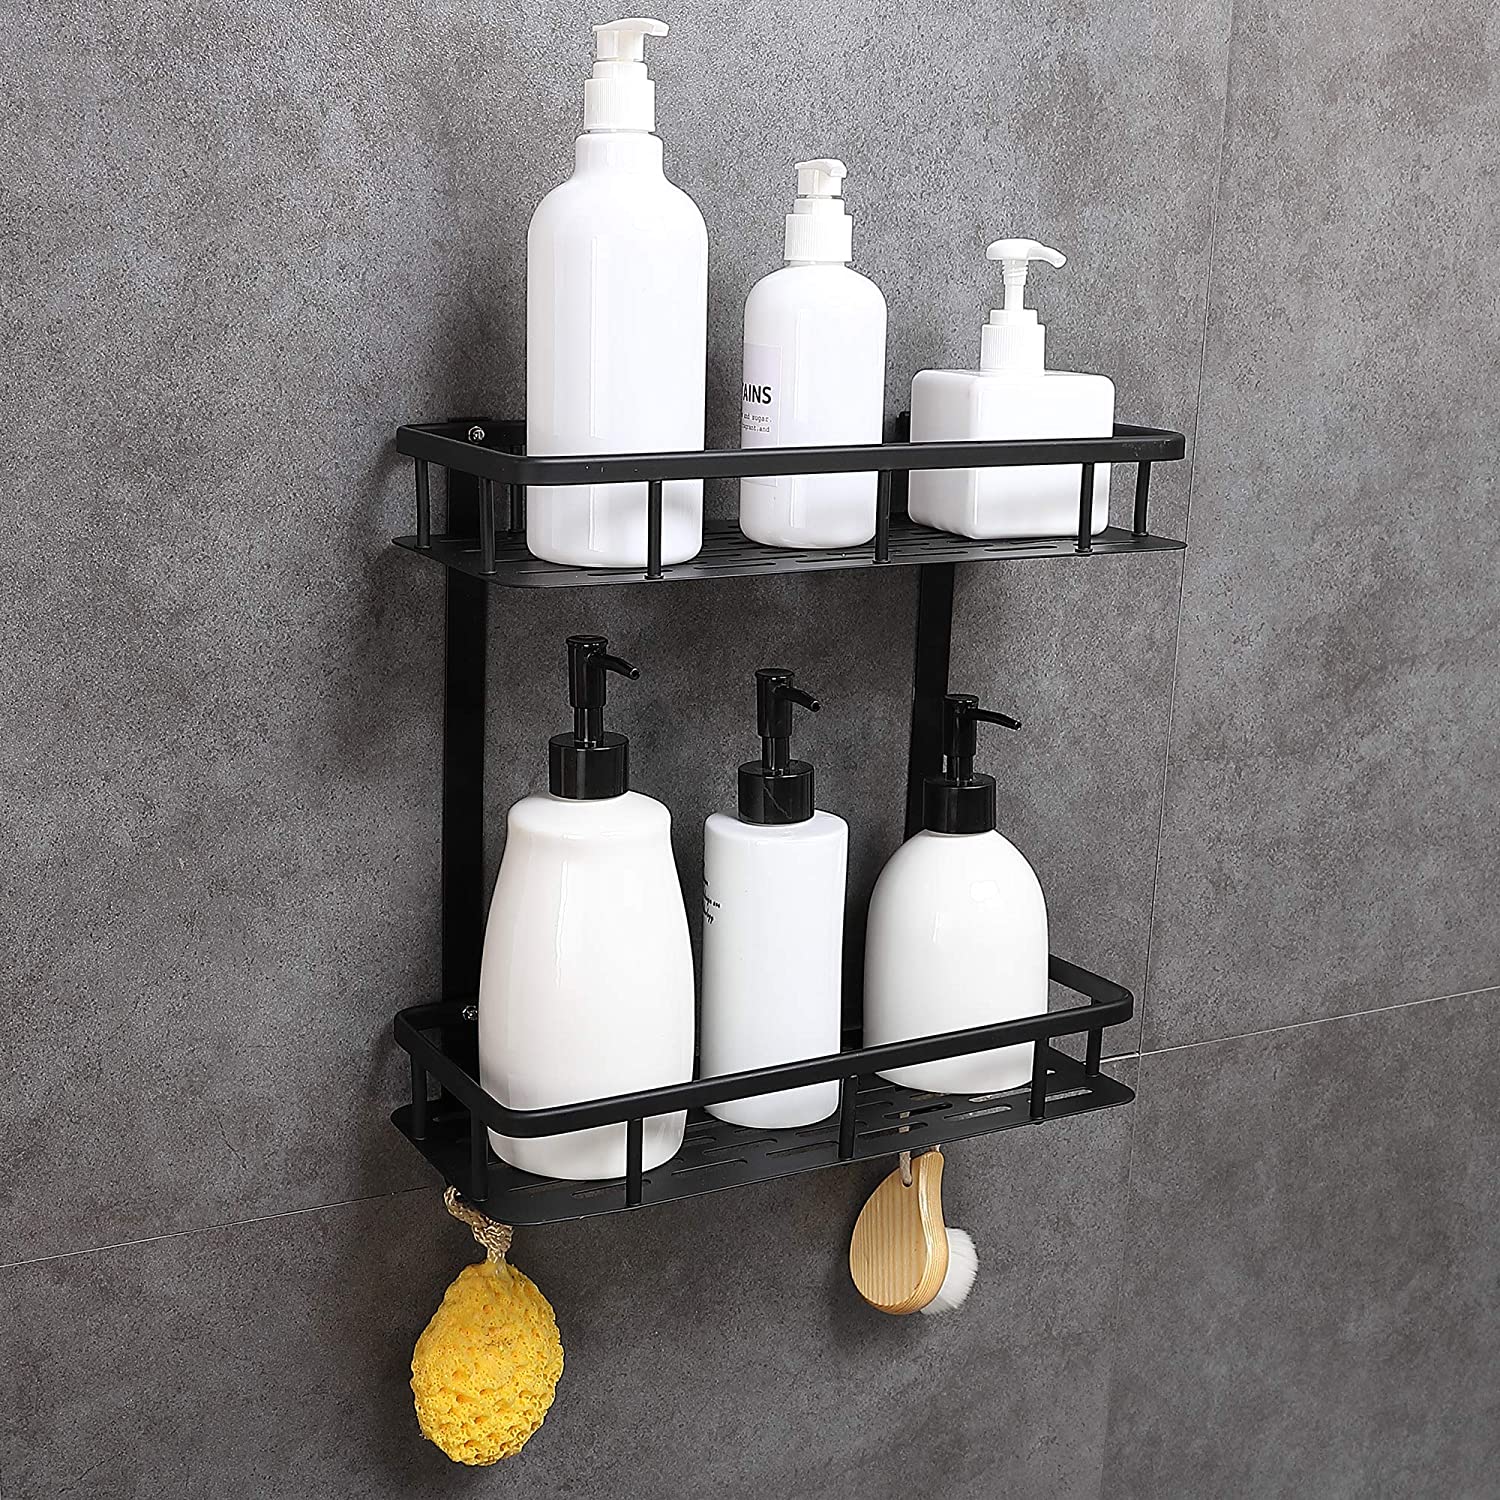 home organisation products - shower rack